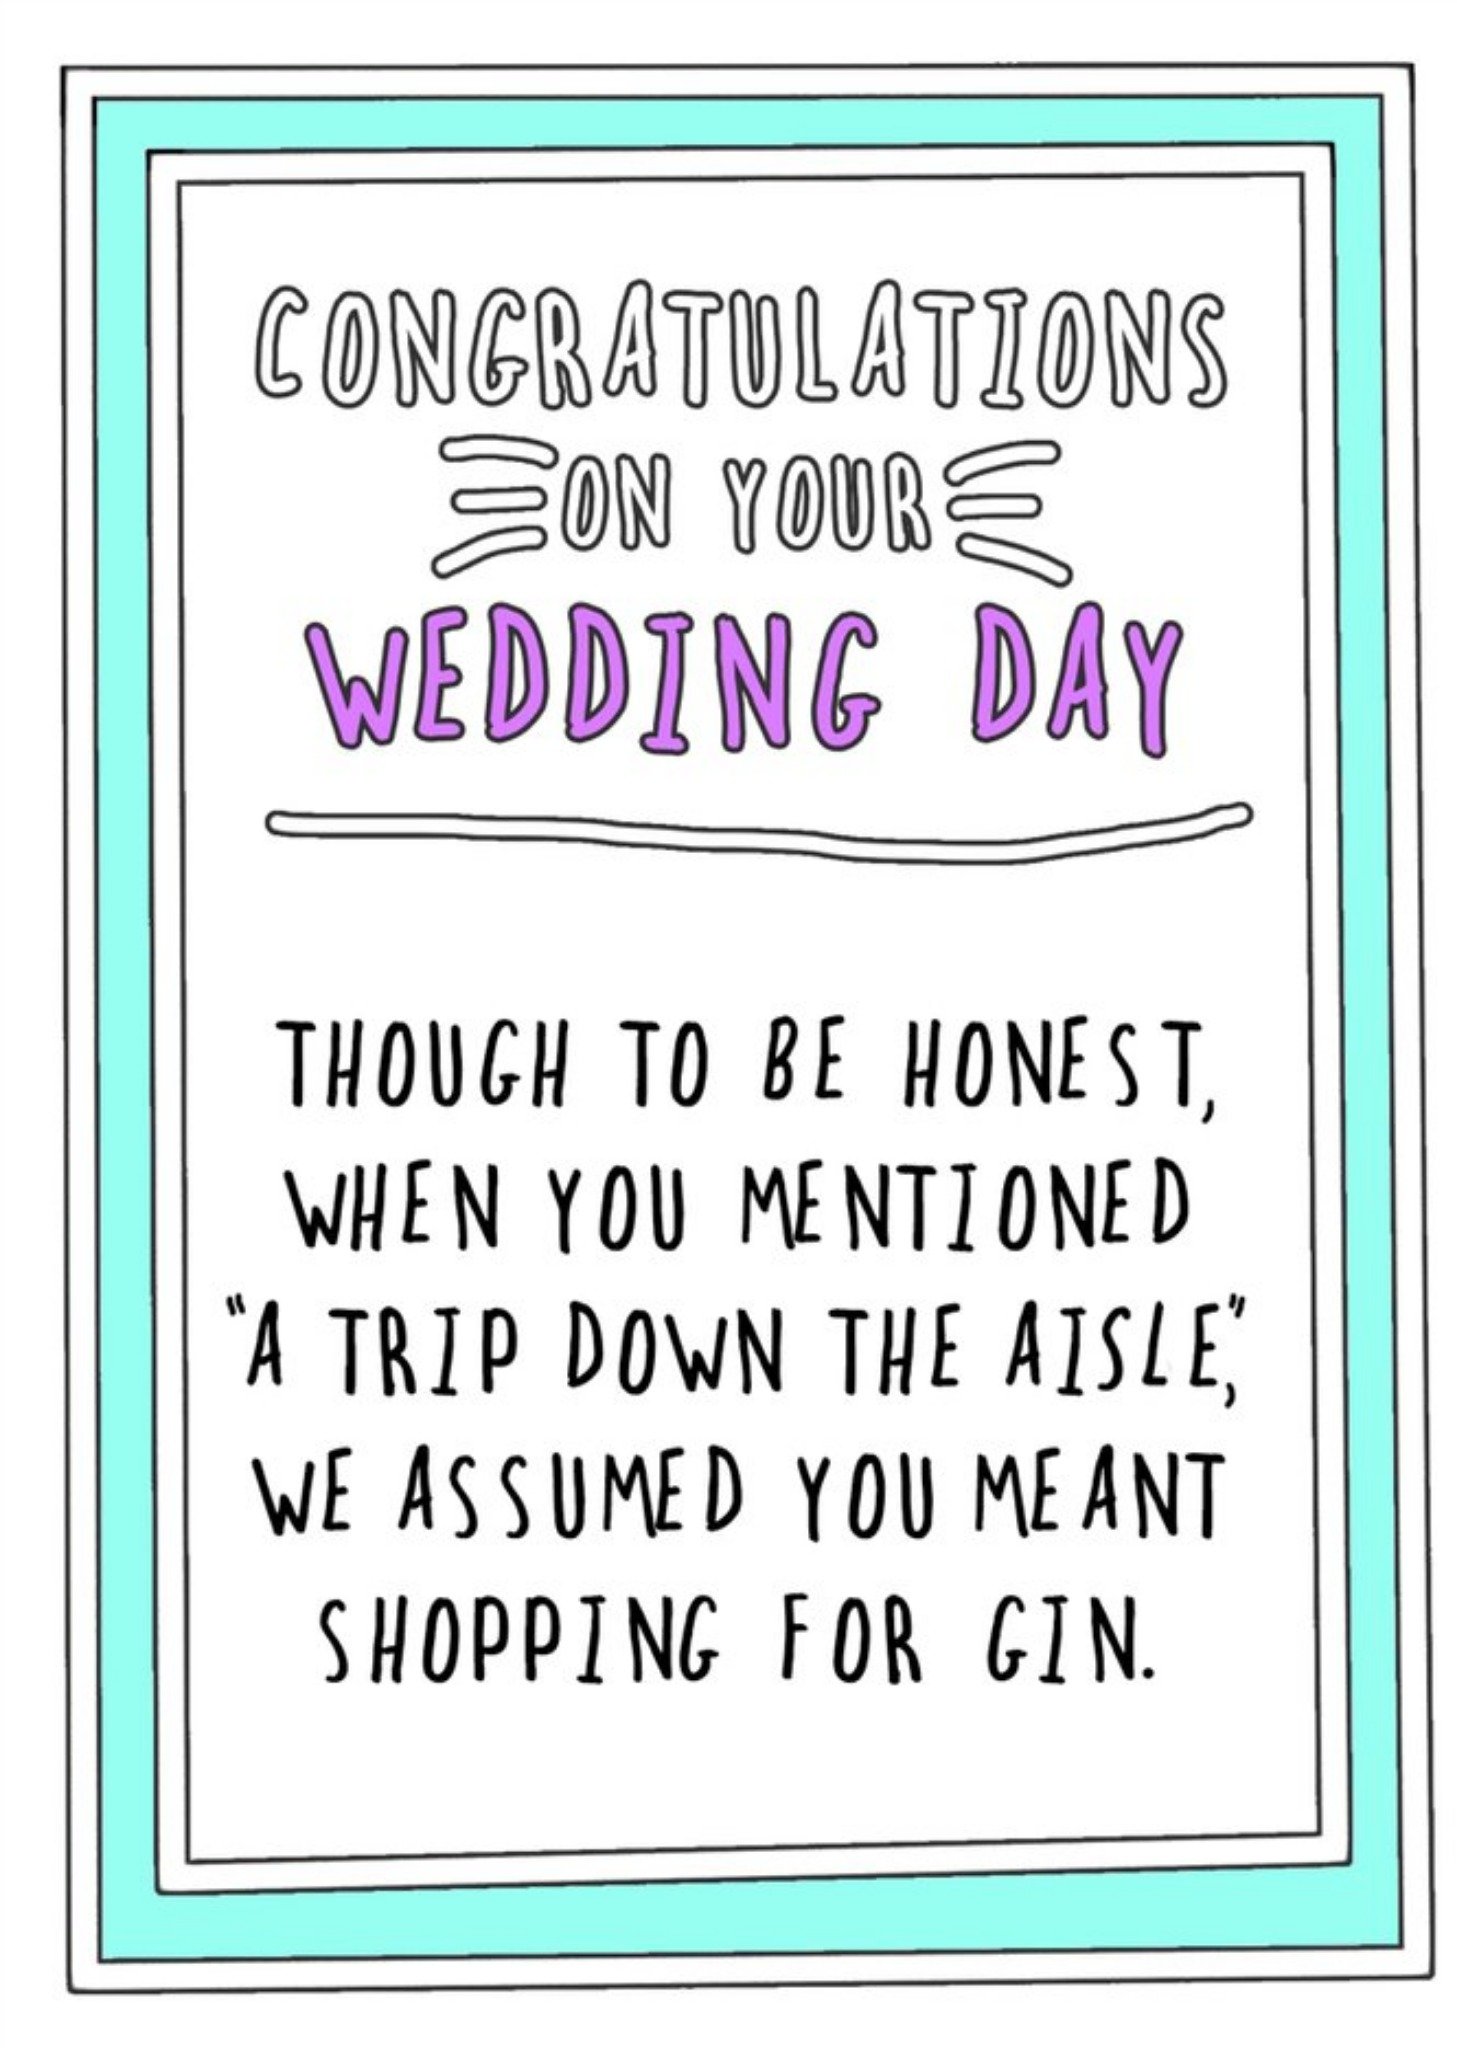 Go La La Funny Cheeky Congratulations On Your Wedding Day Assumed You Meant Shopping For Gin Card, L